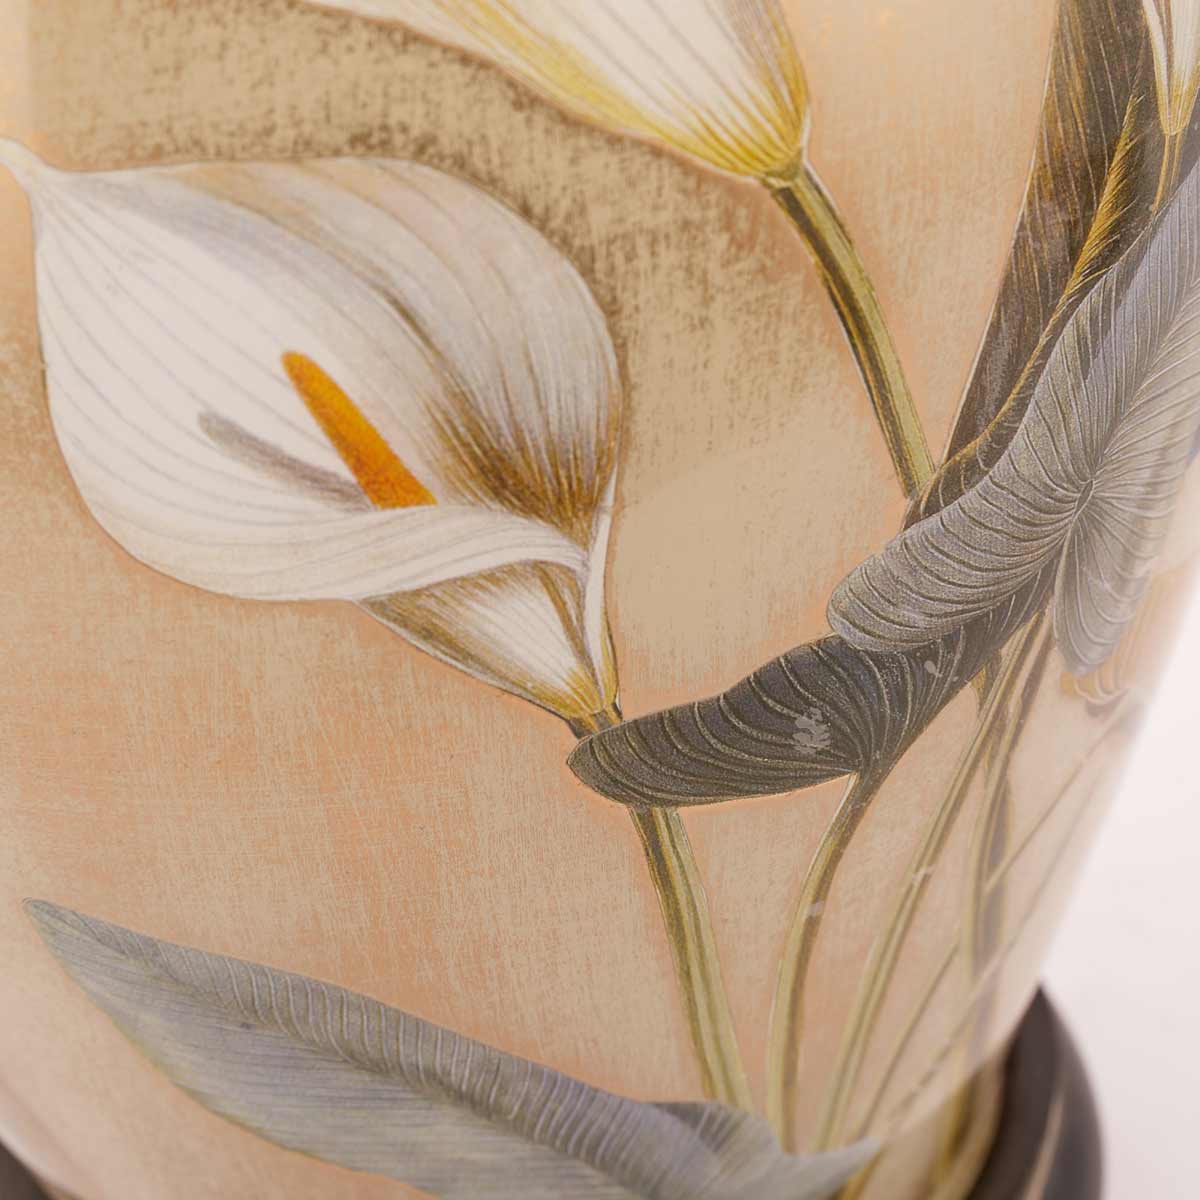 Arum lily on a Jenny Worrall table lamp sold by South Charlotte Fine Lighting